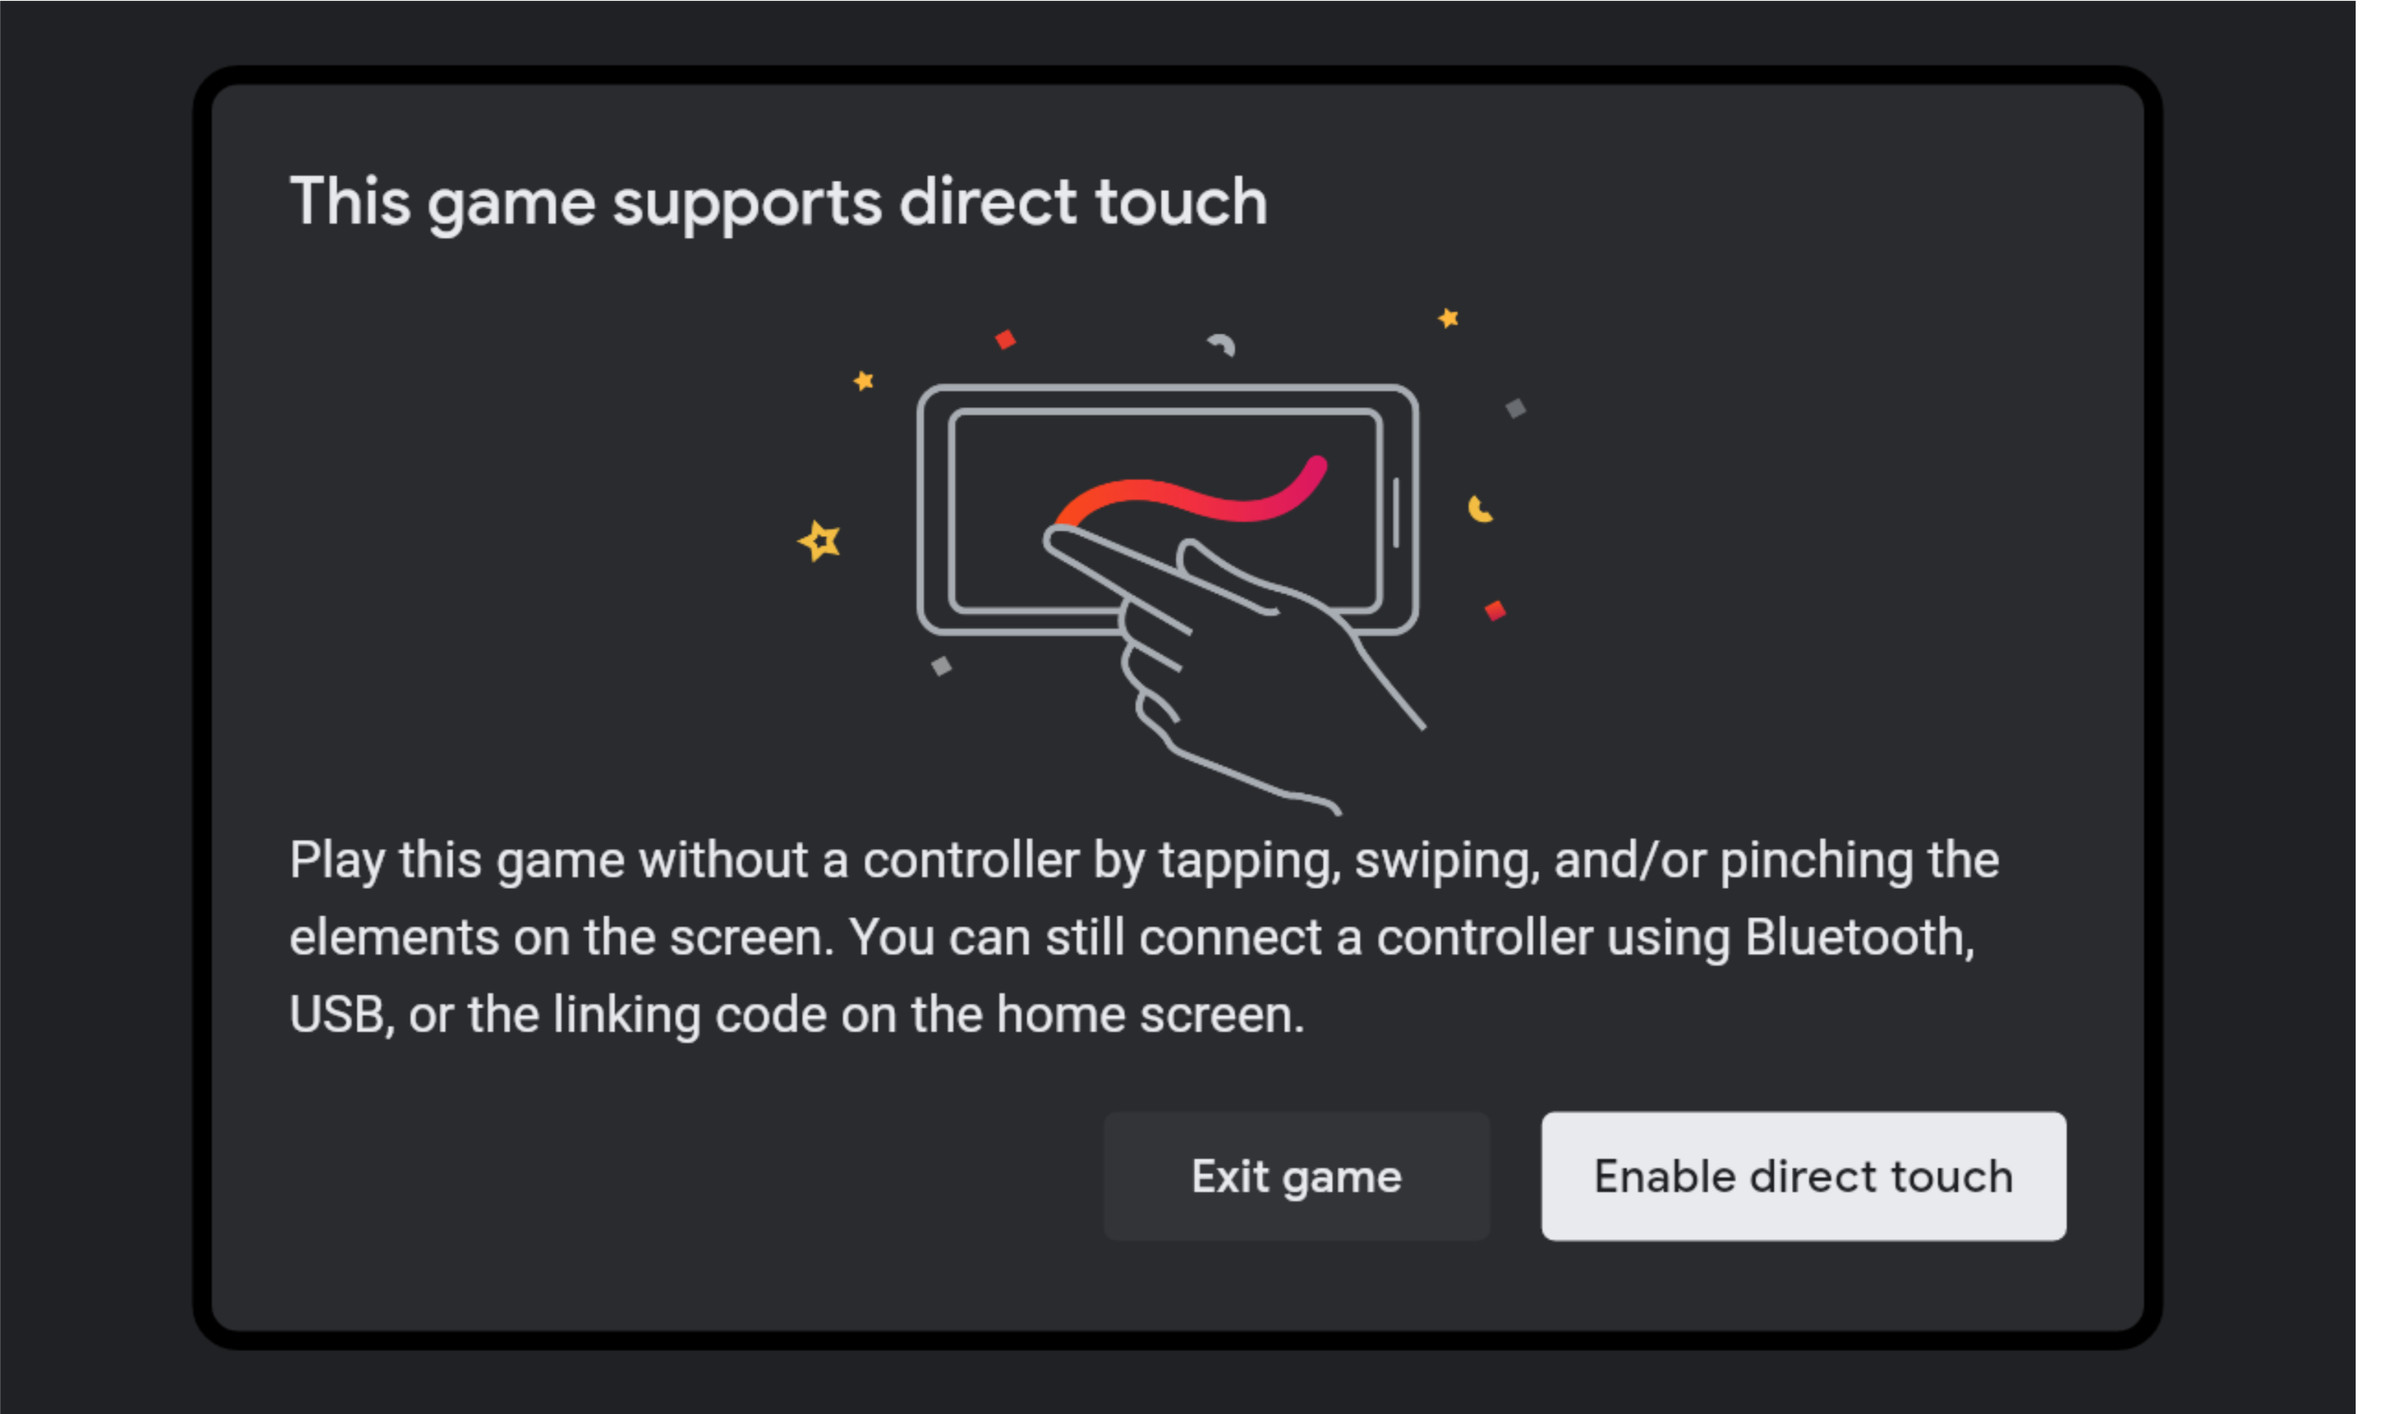 Stadia’s in-app prompt to enable direct touch.